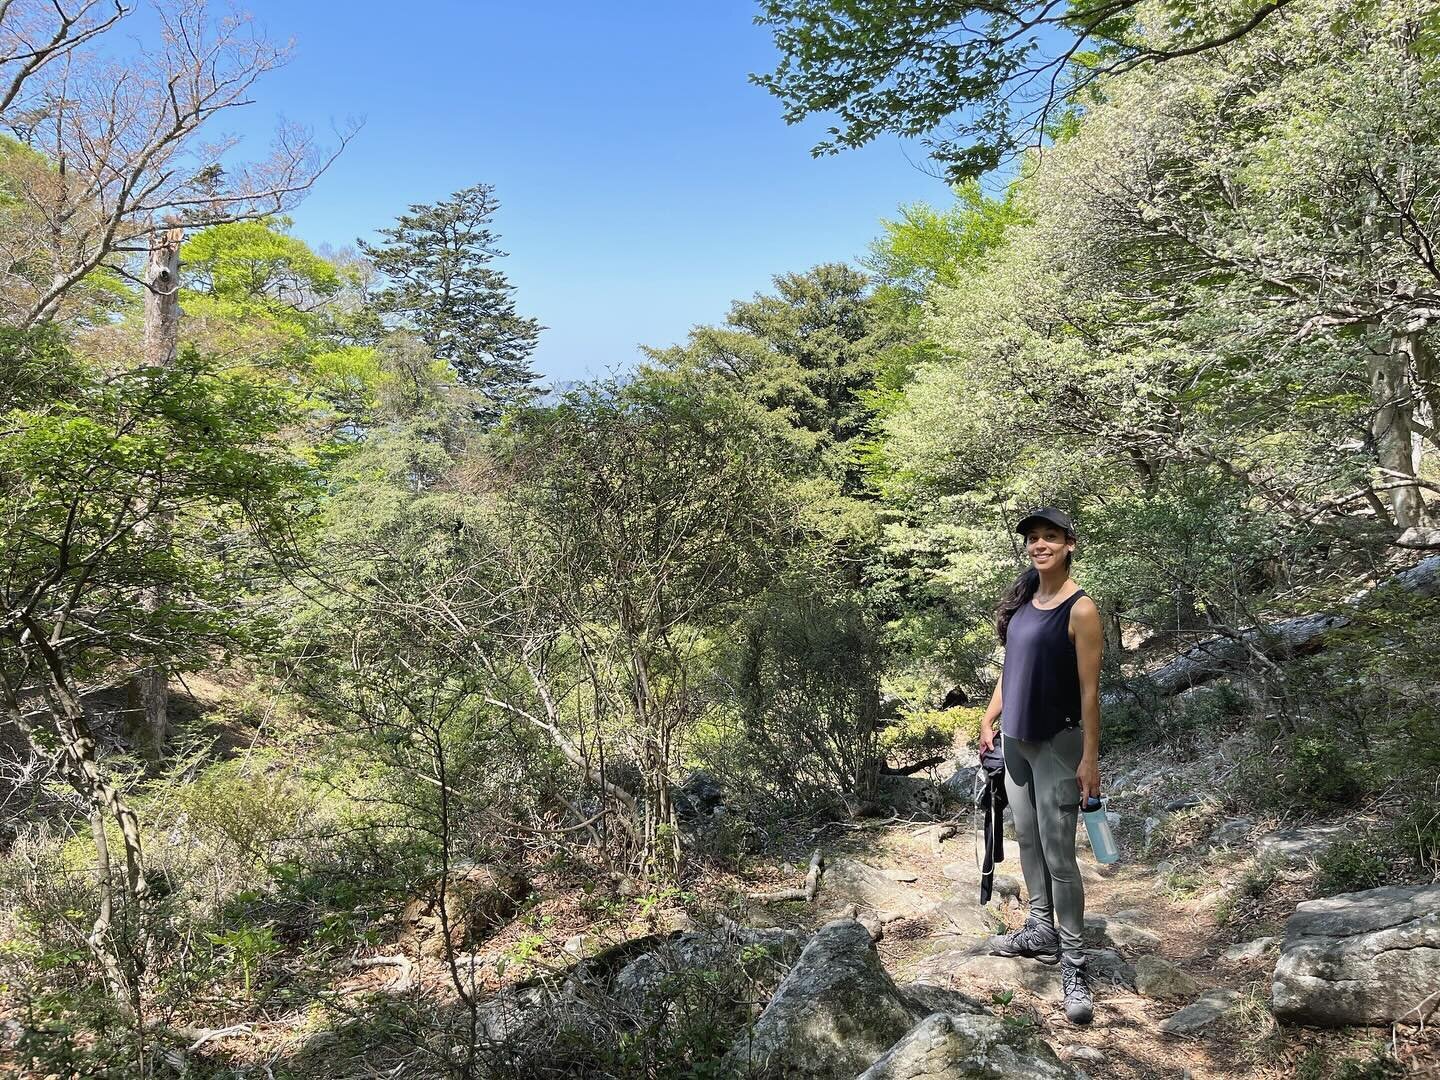 Happy to share a new hiking guide for #Kinkasan Island (金華山), one of the highlights of the Michinoku Coastal Trail! ⛩️

Kinkasan, considered one of the #Tohoku regions most sacred places, offers a unique blend of nature, spirituality, and culture.

T